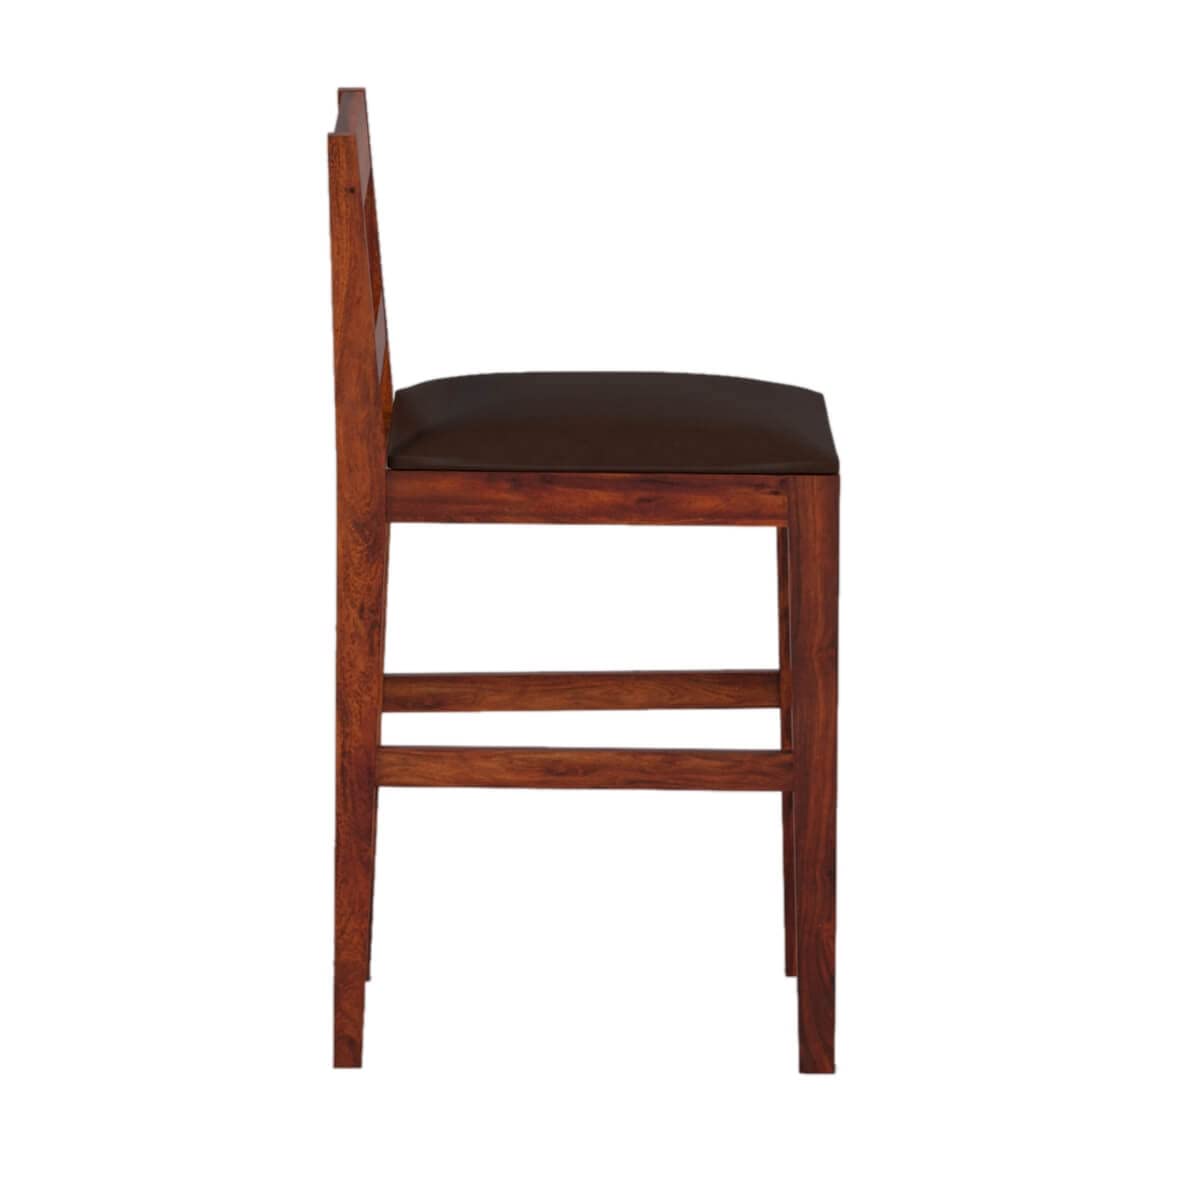 Solid Sheesham Wood Bar Chairs for Home |Solid Long Wooden Chair | Chairs with Cushion | High Bar Chair Set of 2 | Honey Finish